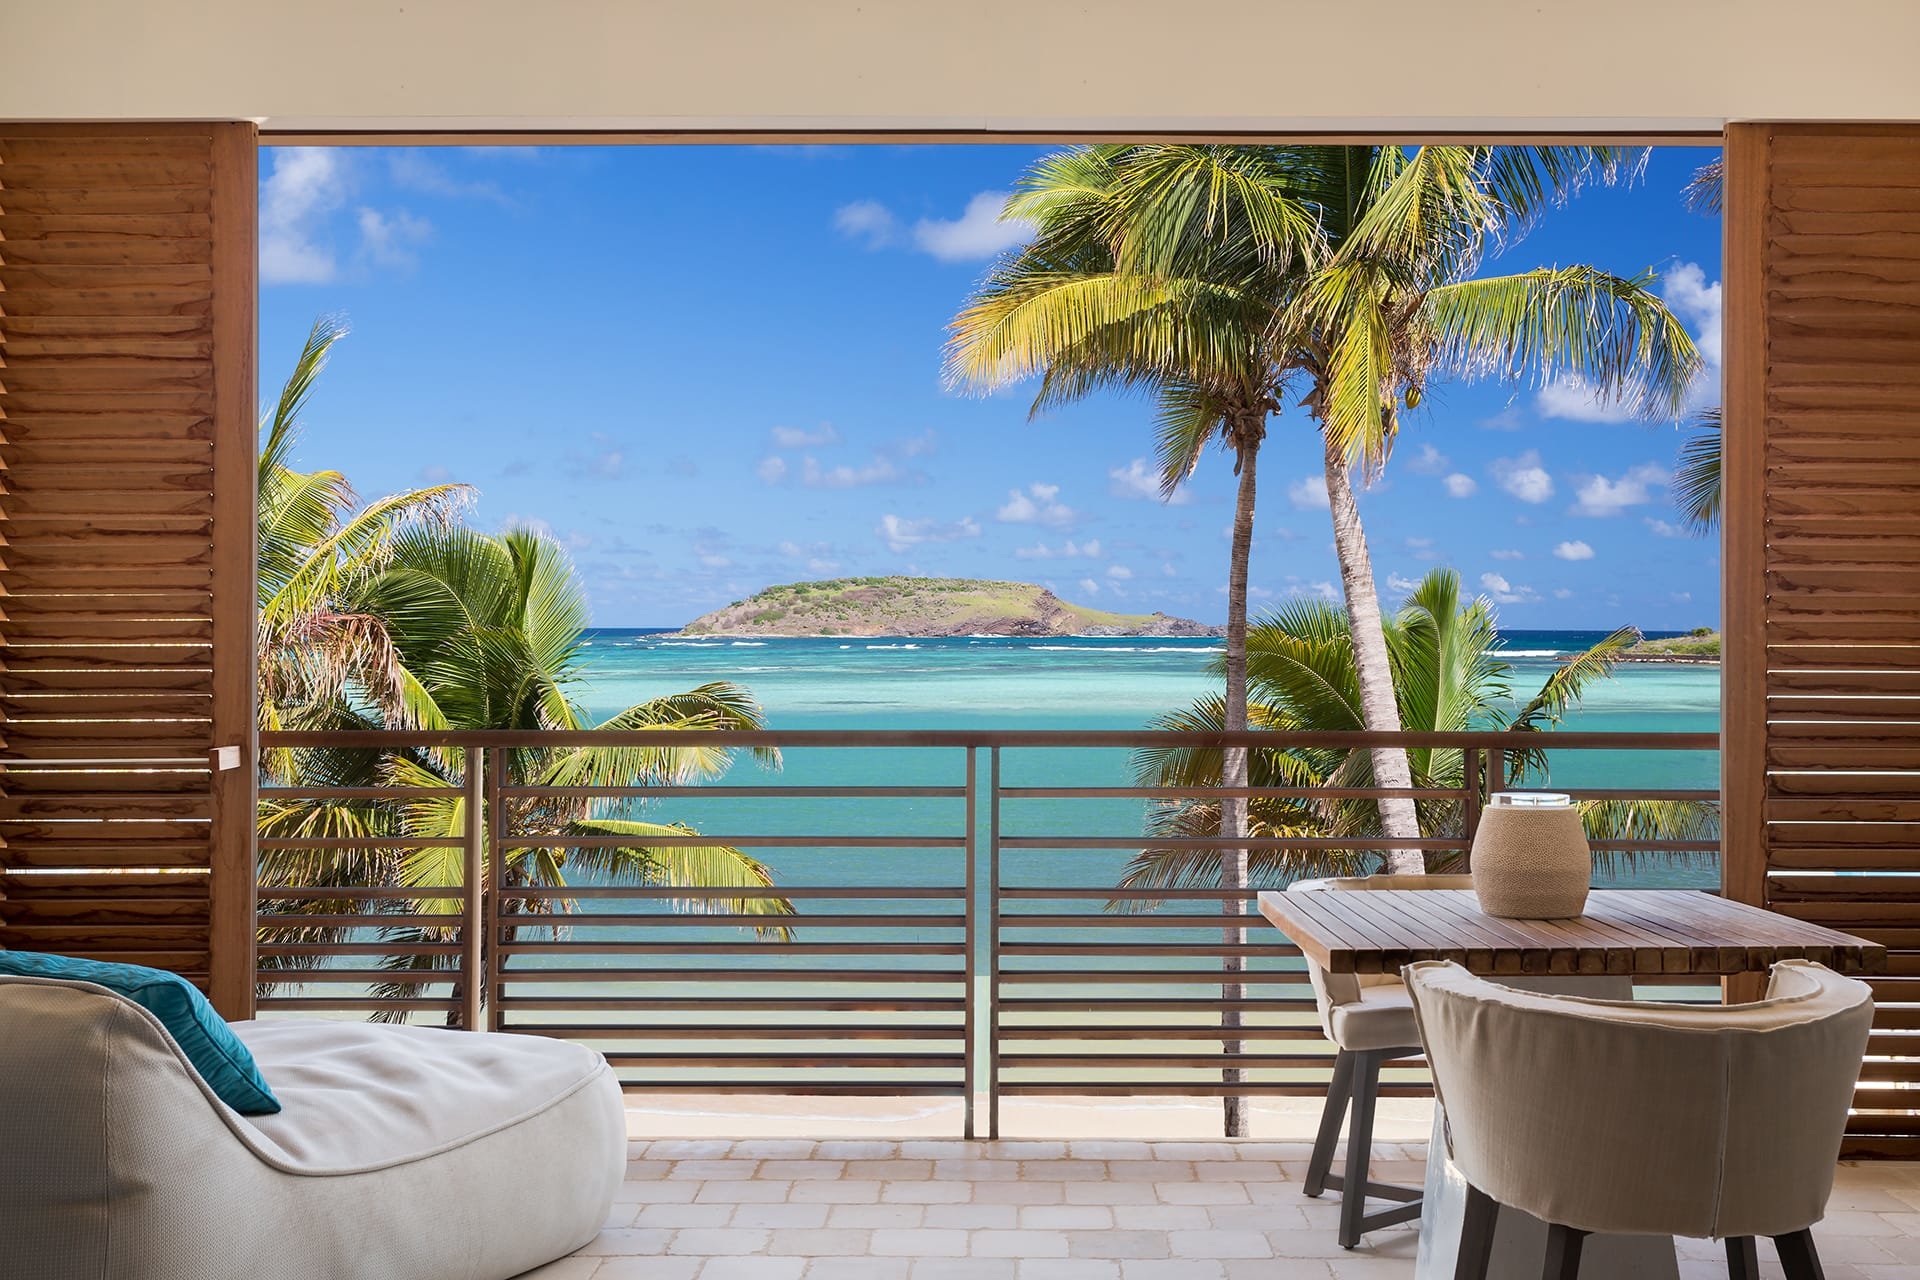 Relax in Breathtaking St. Barths at Le Barthélemy Hotel and Spa